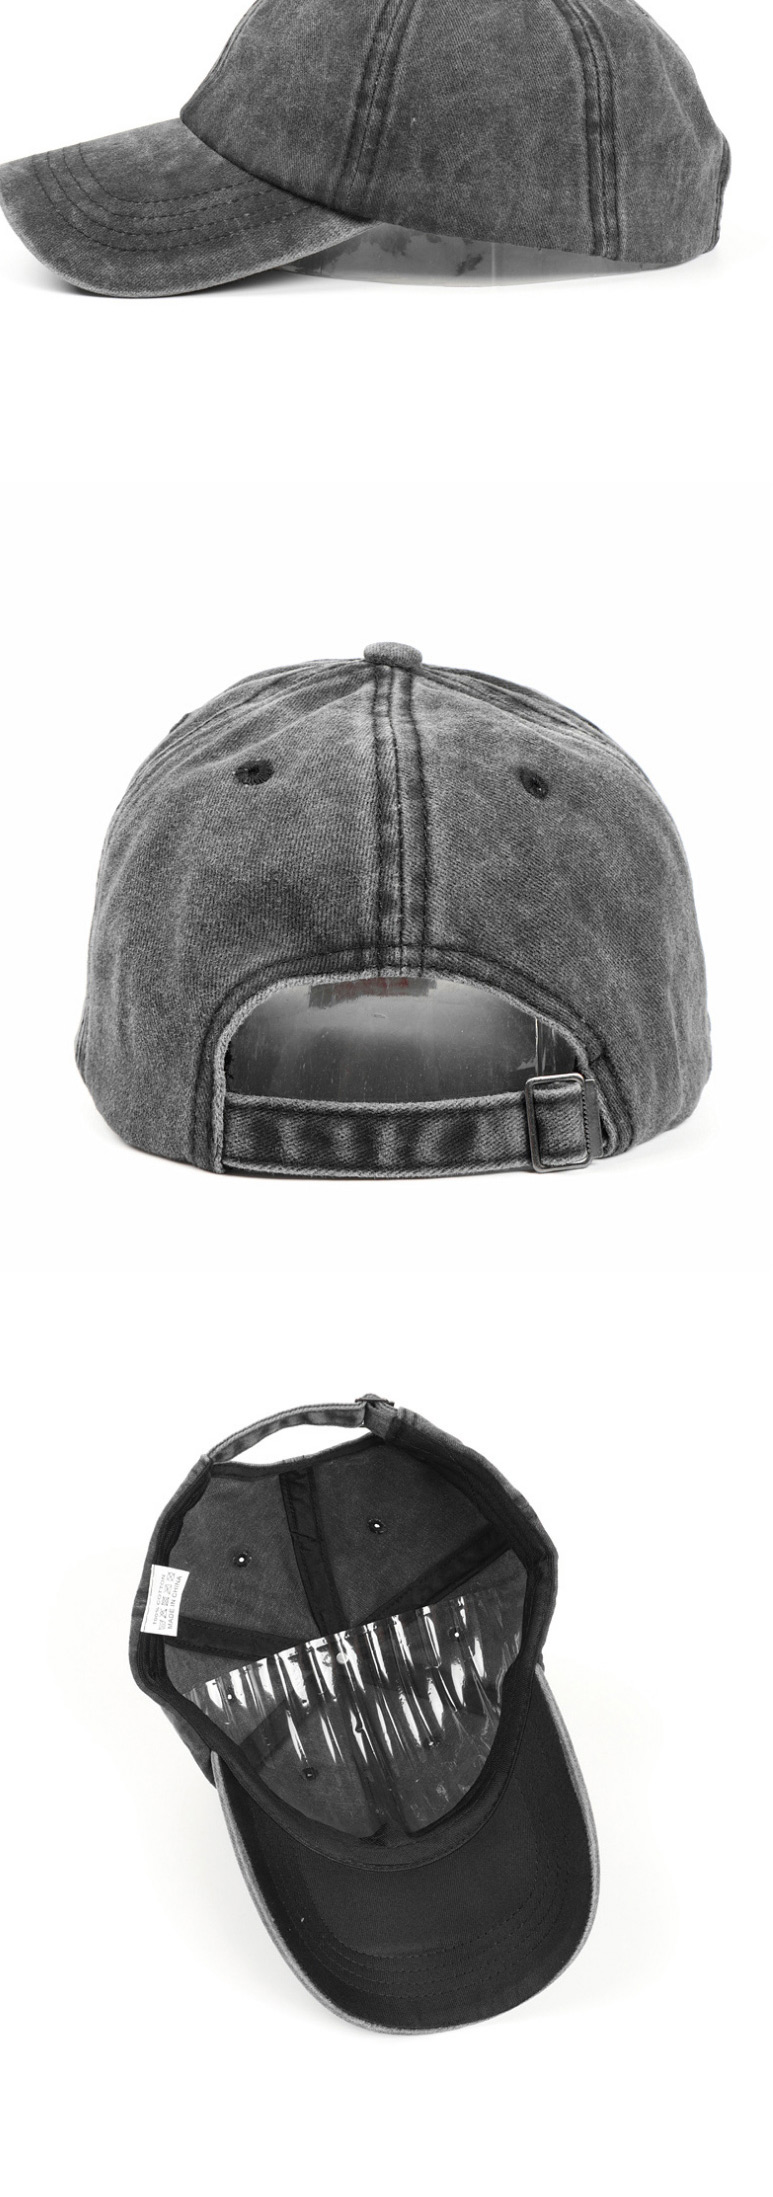 Fashion Light Gray Washed Distressed Denim Soft Top And Curved Brim Cap,Baseball Caps